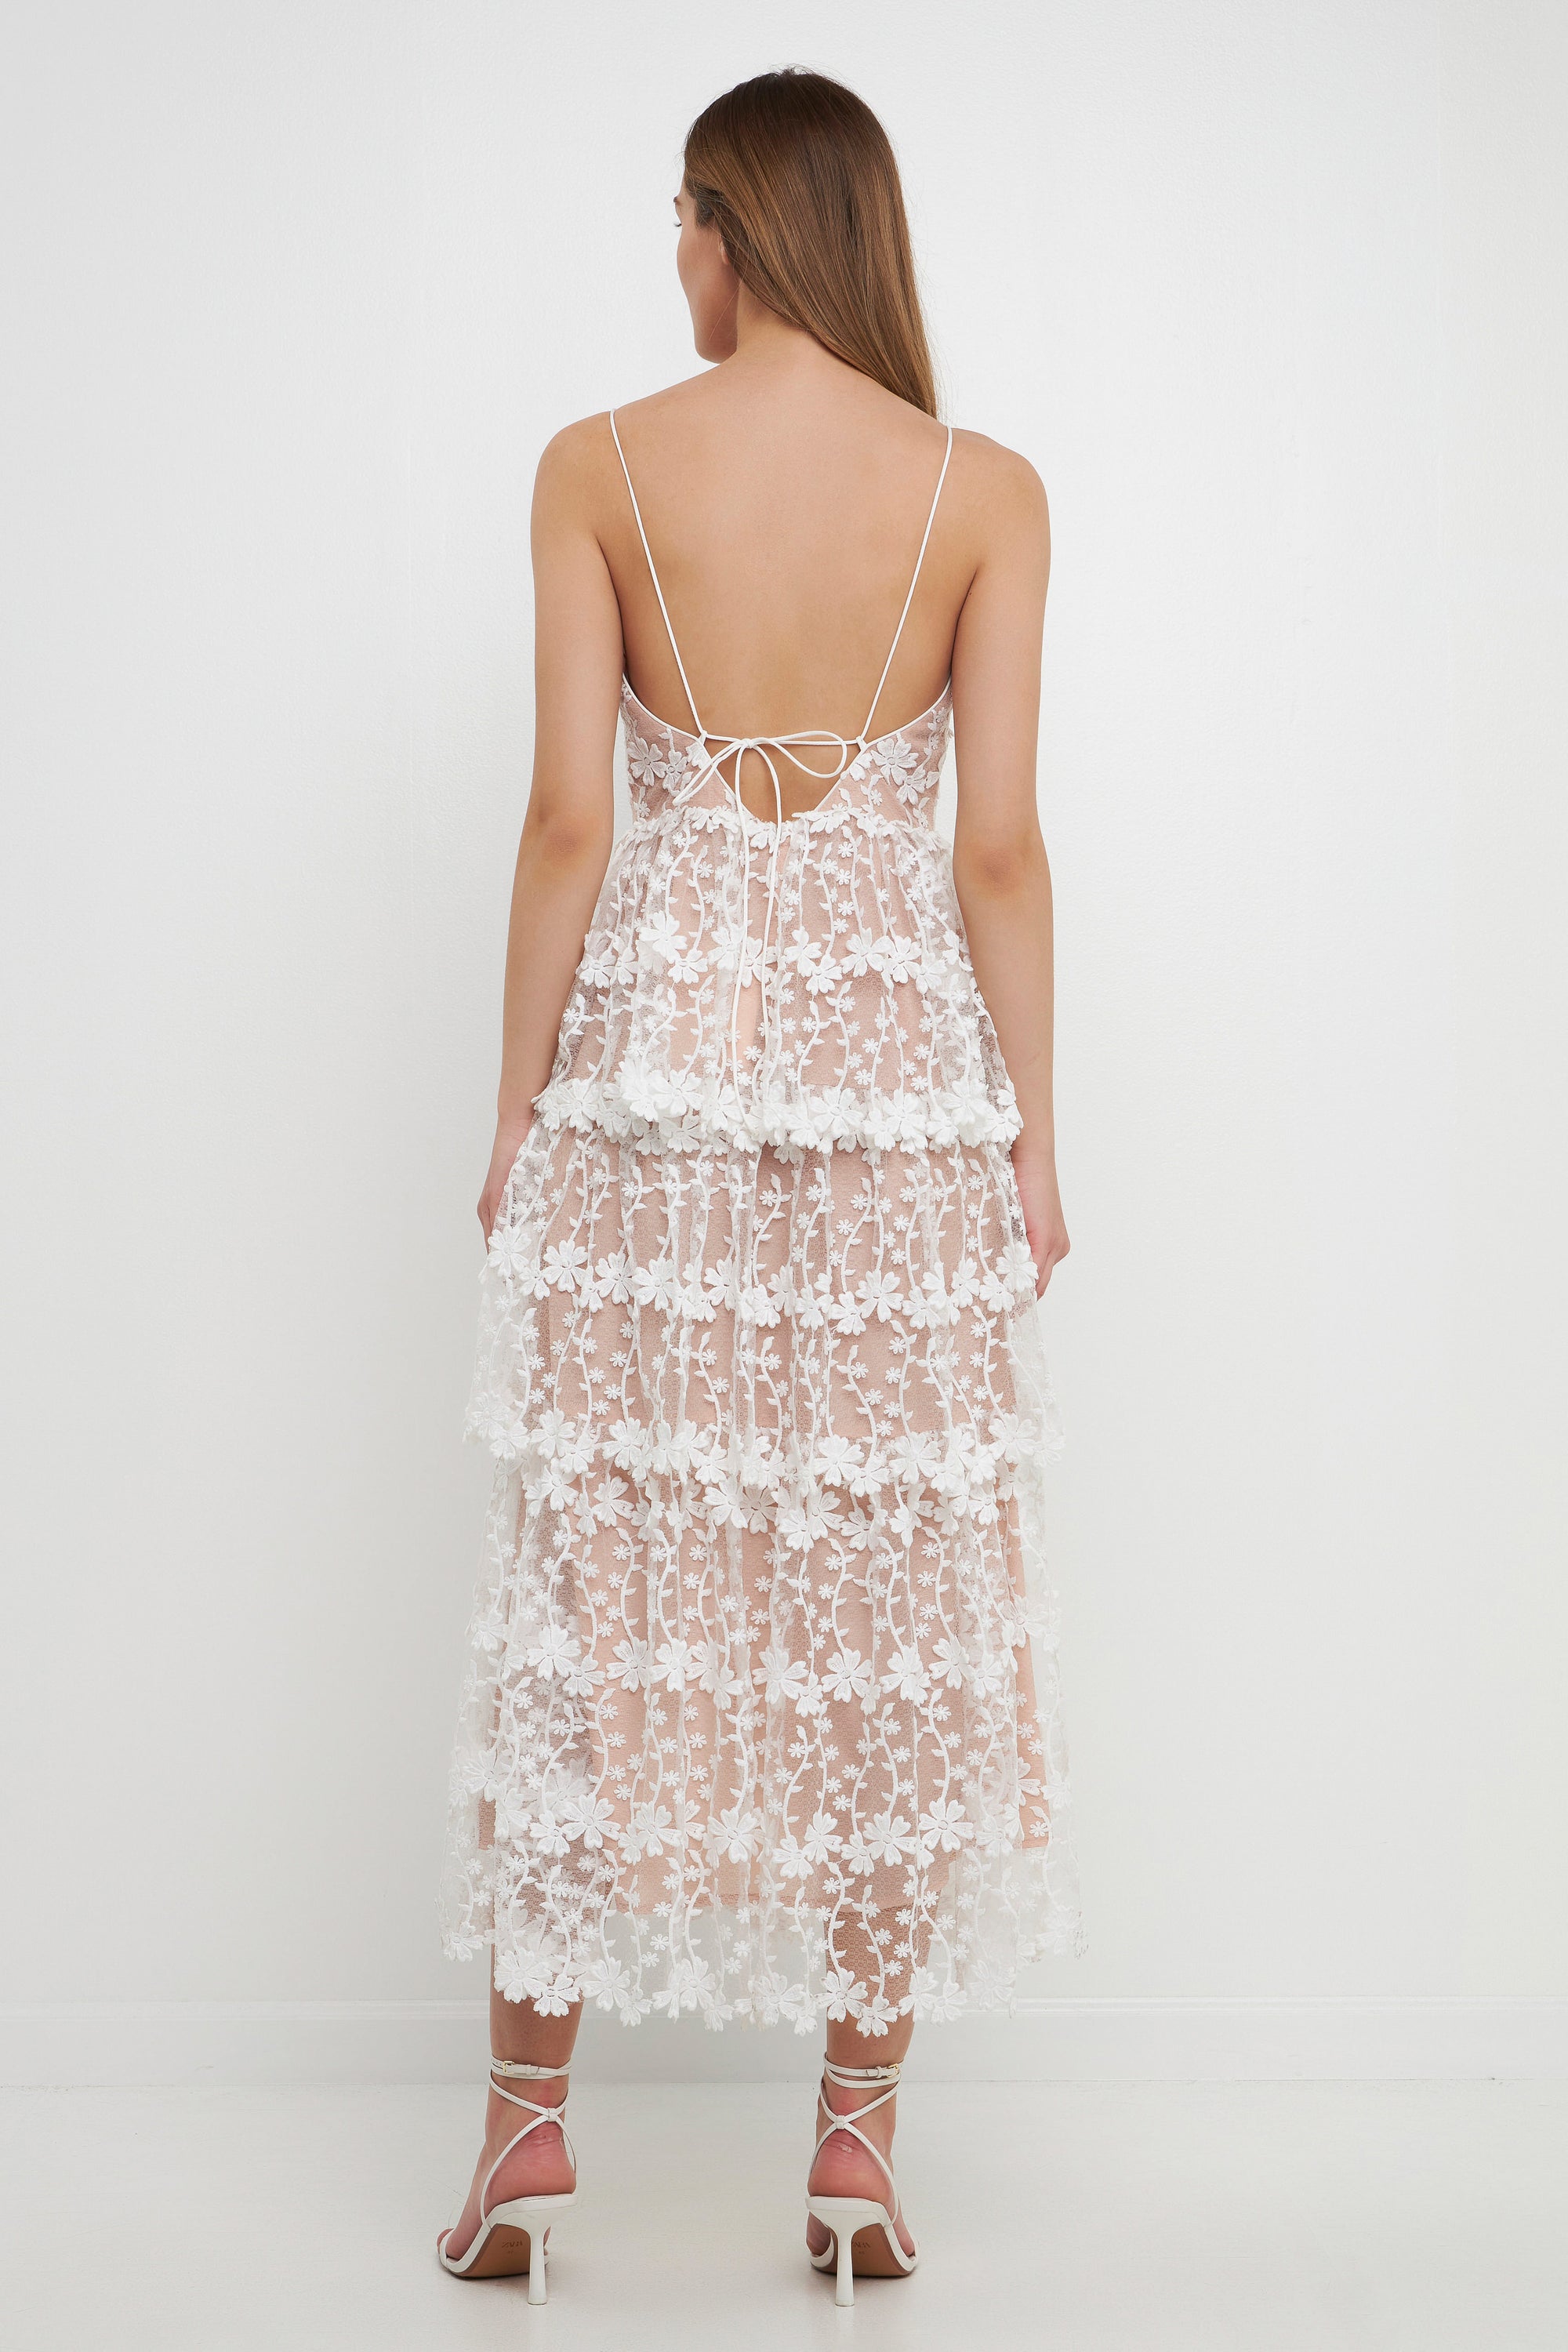 IVY LACE MIDI DRESS IN WHITE